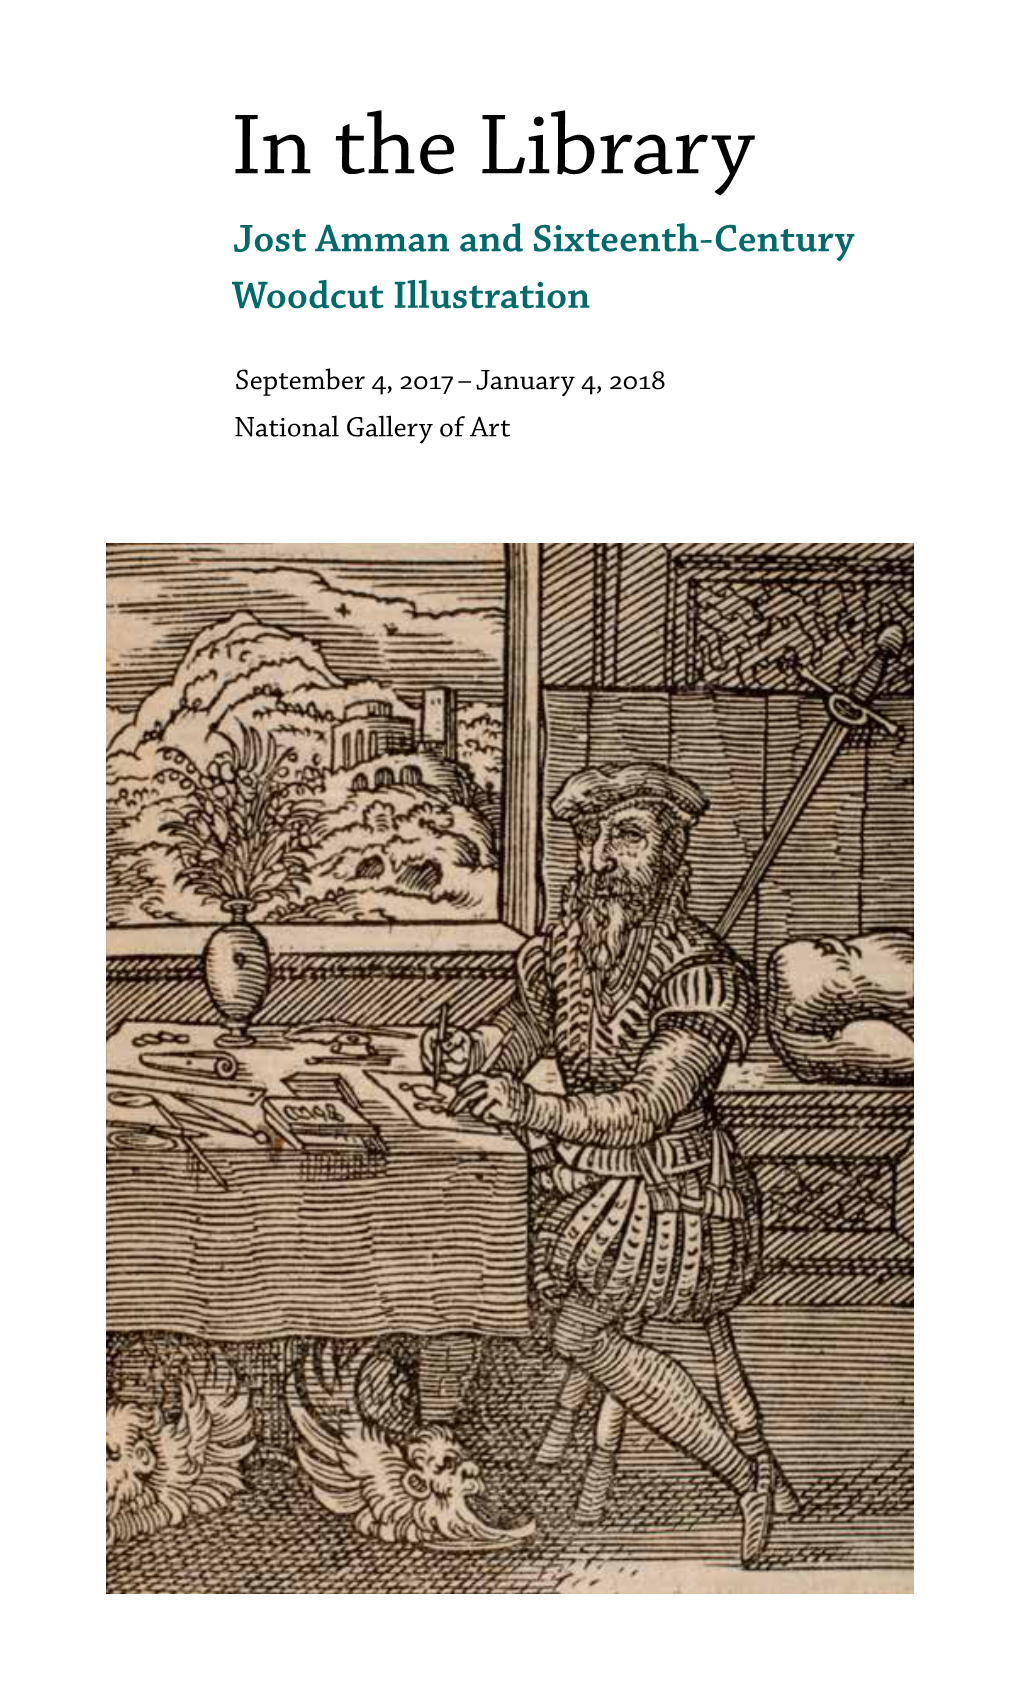 In the Library: Jost Amman and Sixteenth-Century Woodcut Illustration, September 5, 2017 – January 5, 2018